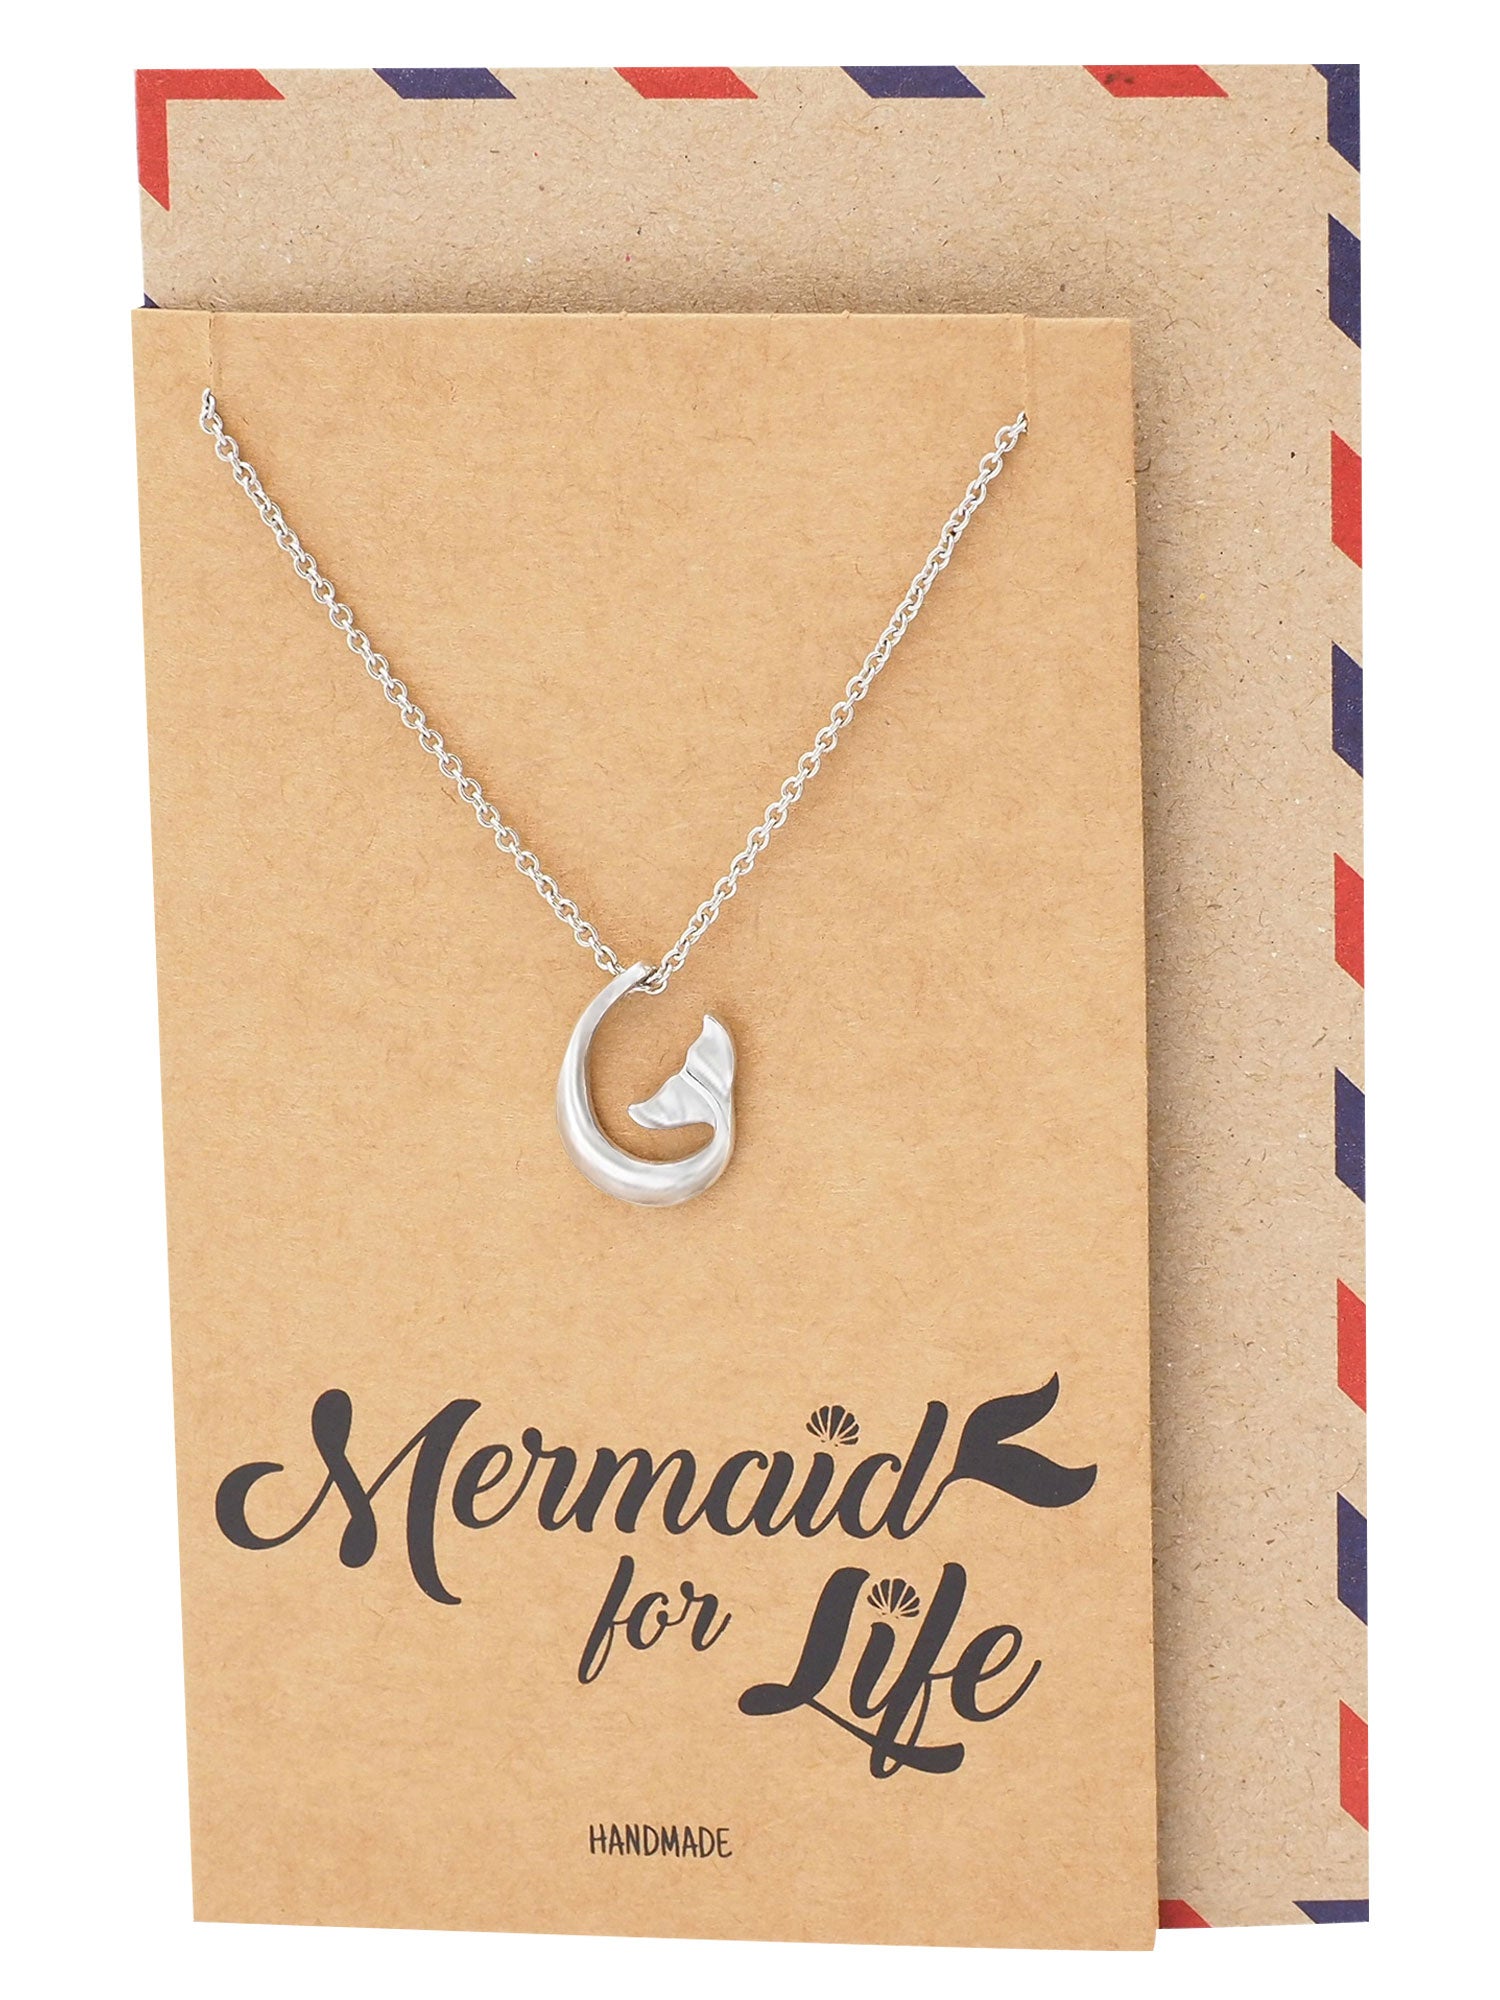 Clemence Mermaid Tail Pendant Necklace, Gifts for Mermaid Lovers with Greeting Card